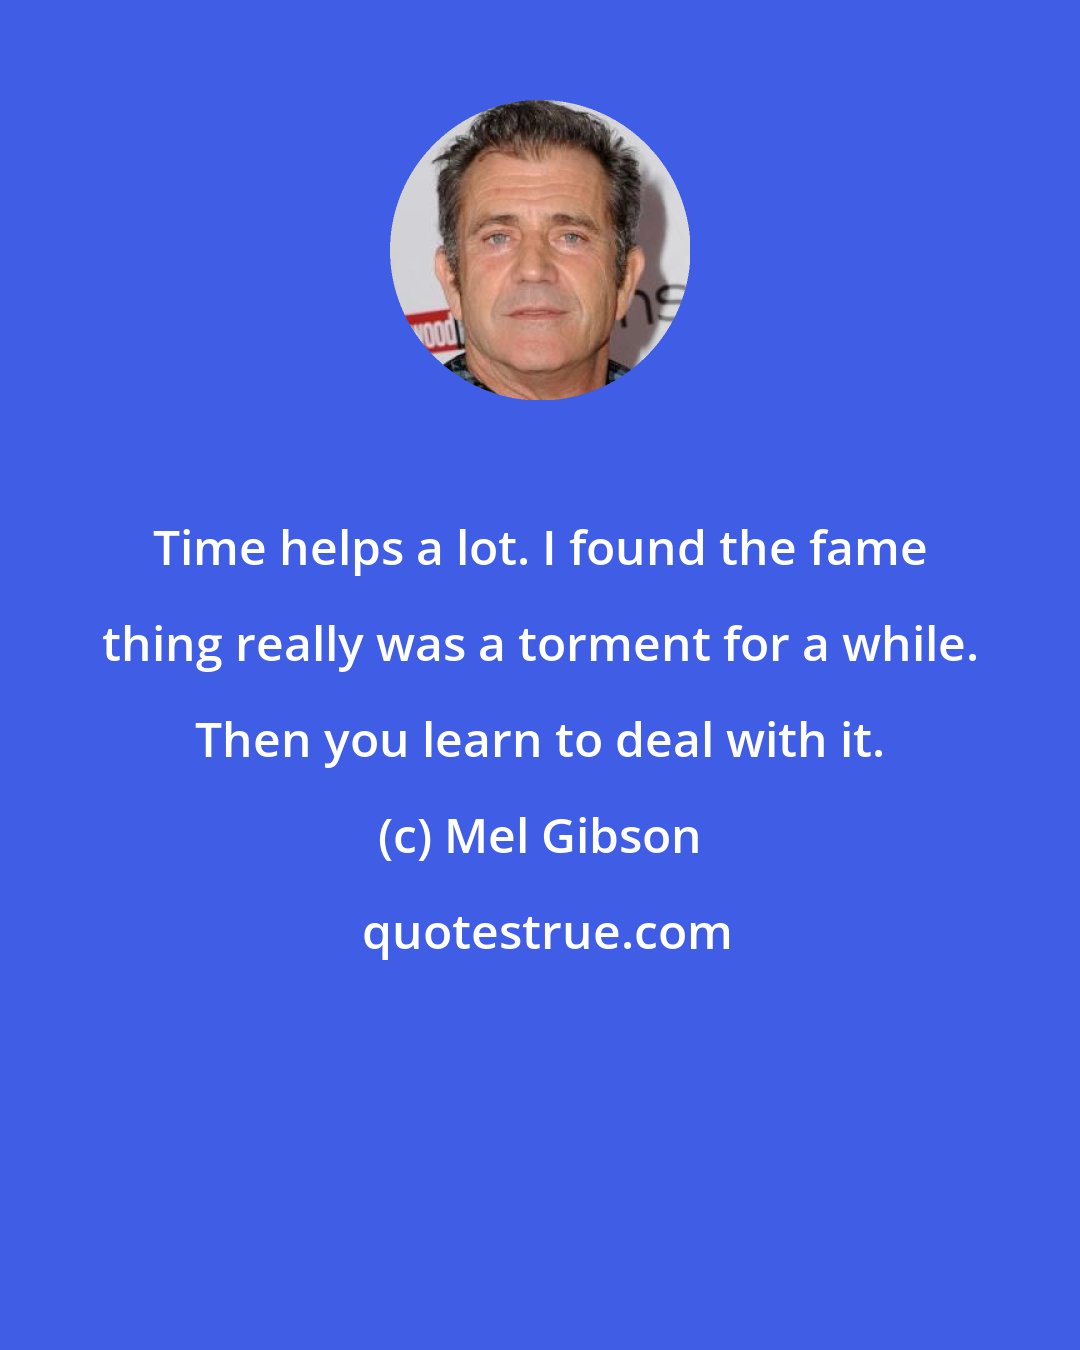 Mel Gibson: Time helps a lot. I found the fame thing really was a torment for a while. Then you learn to deal with it.